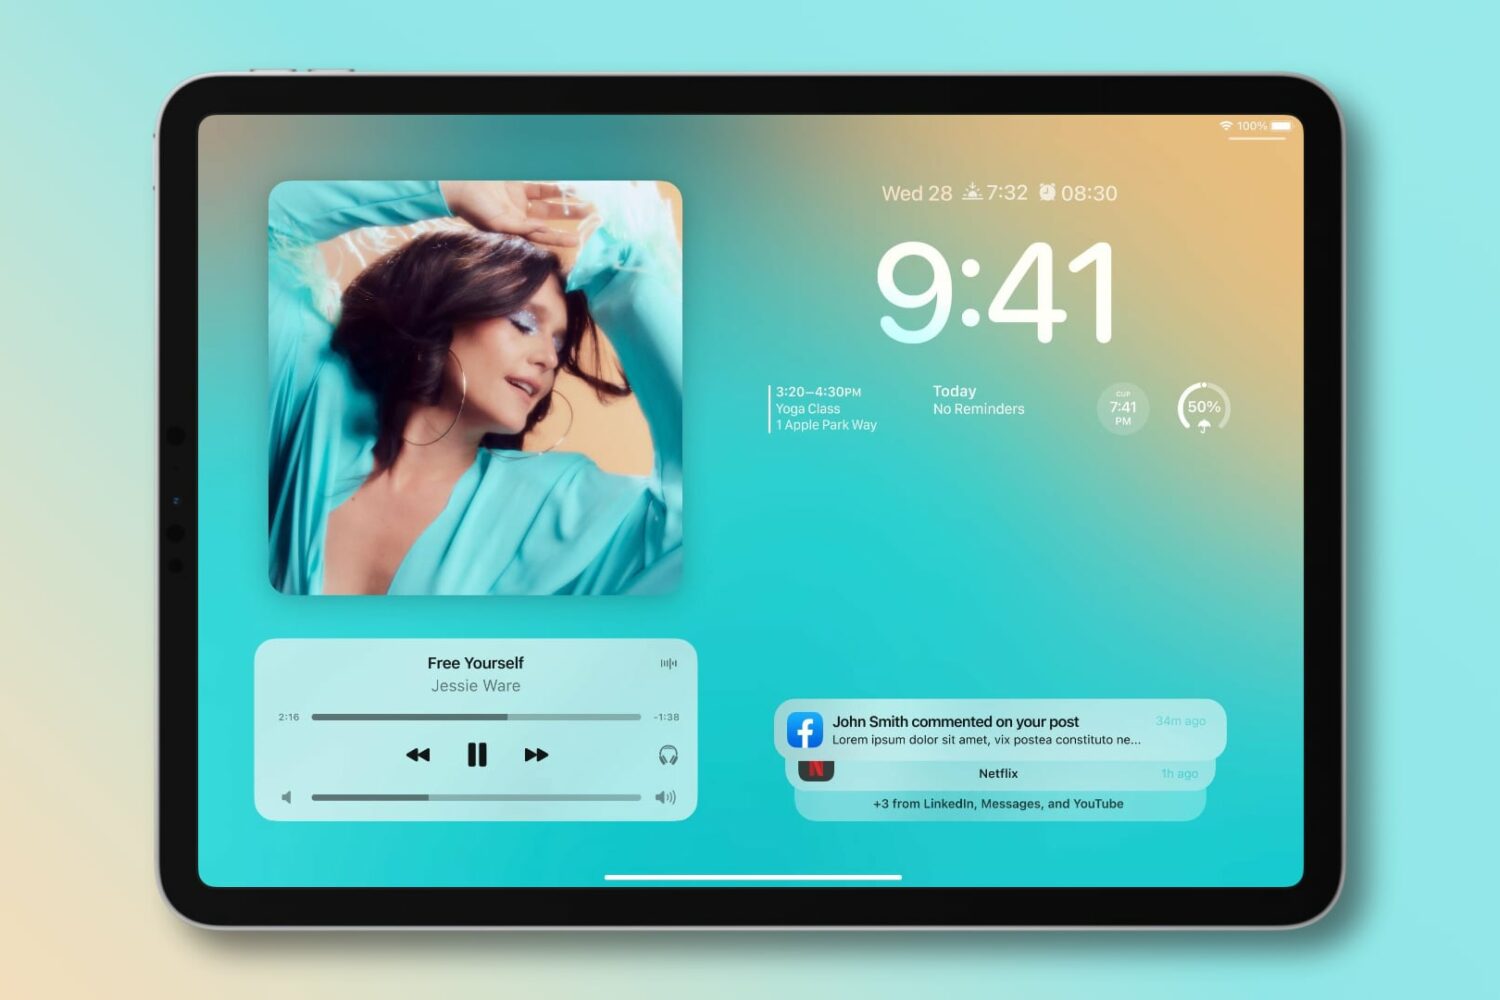 Concept artwork imagining an iPhone-like Lock Screen design on iPad with a 2-column layout